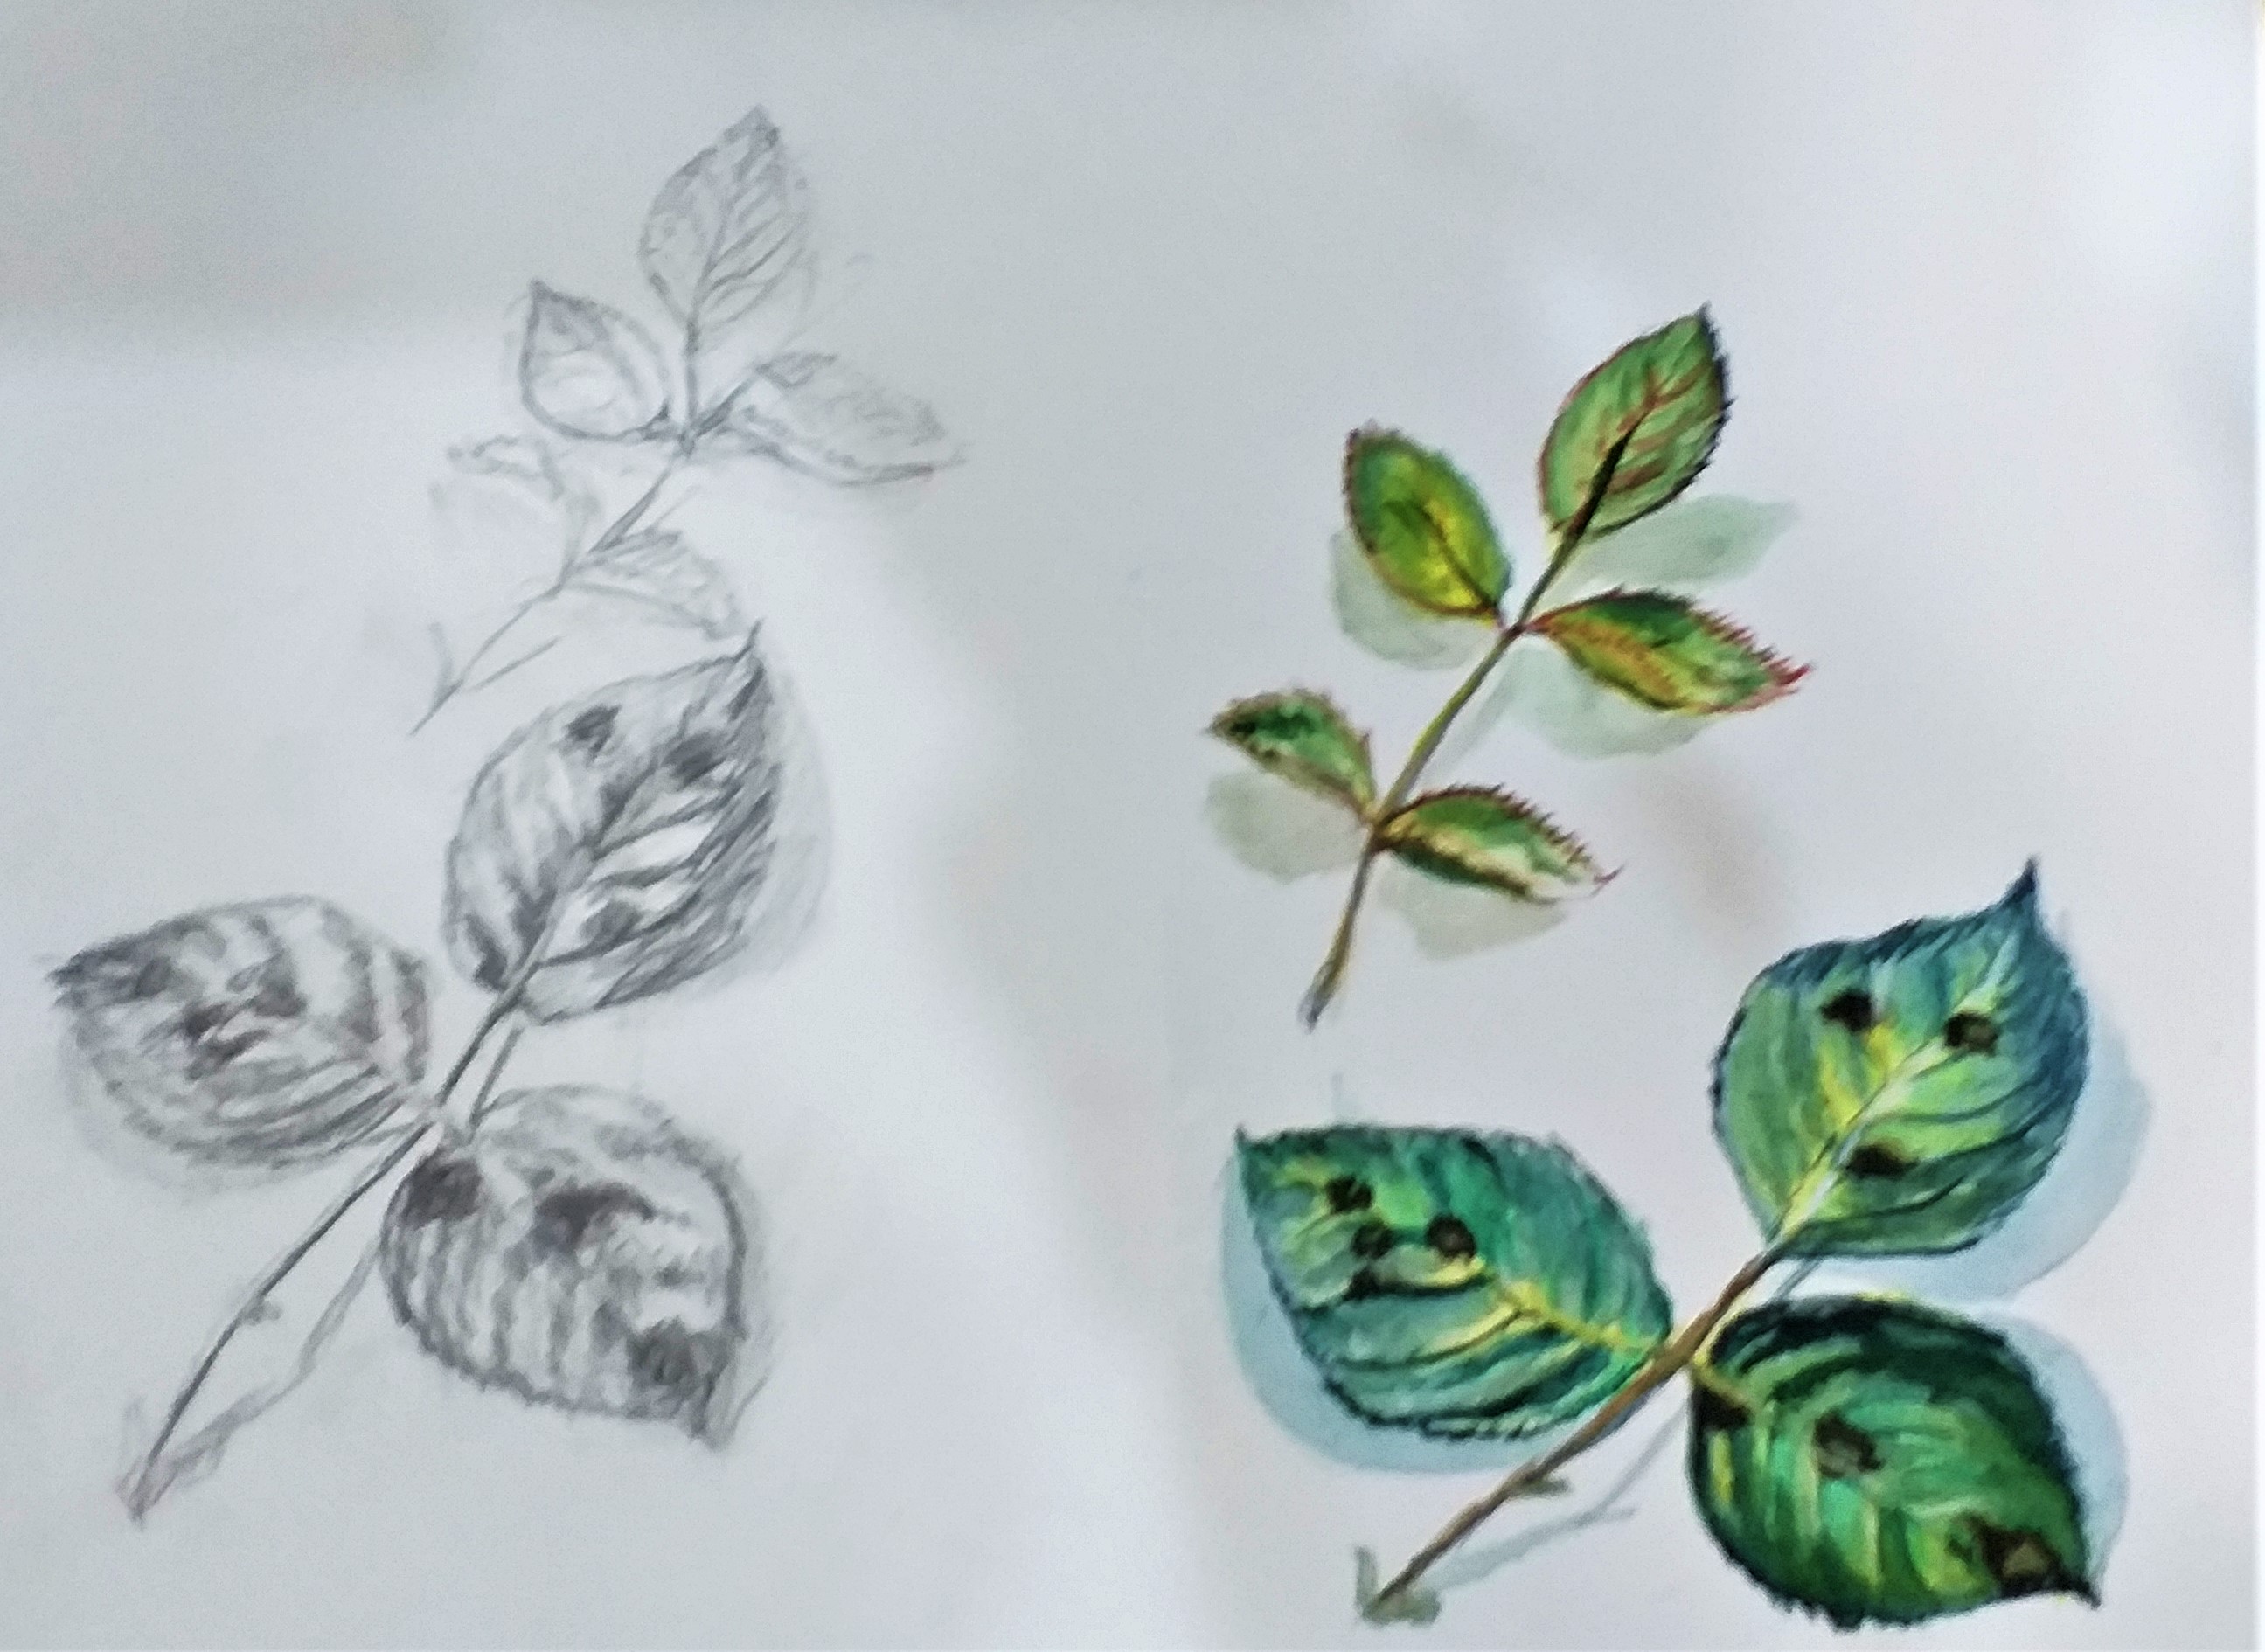 Watercolour and pencil studies of leaves created by a student at Raya's Art Classes in West Midlands